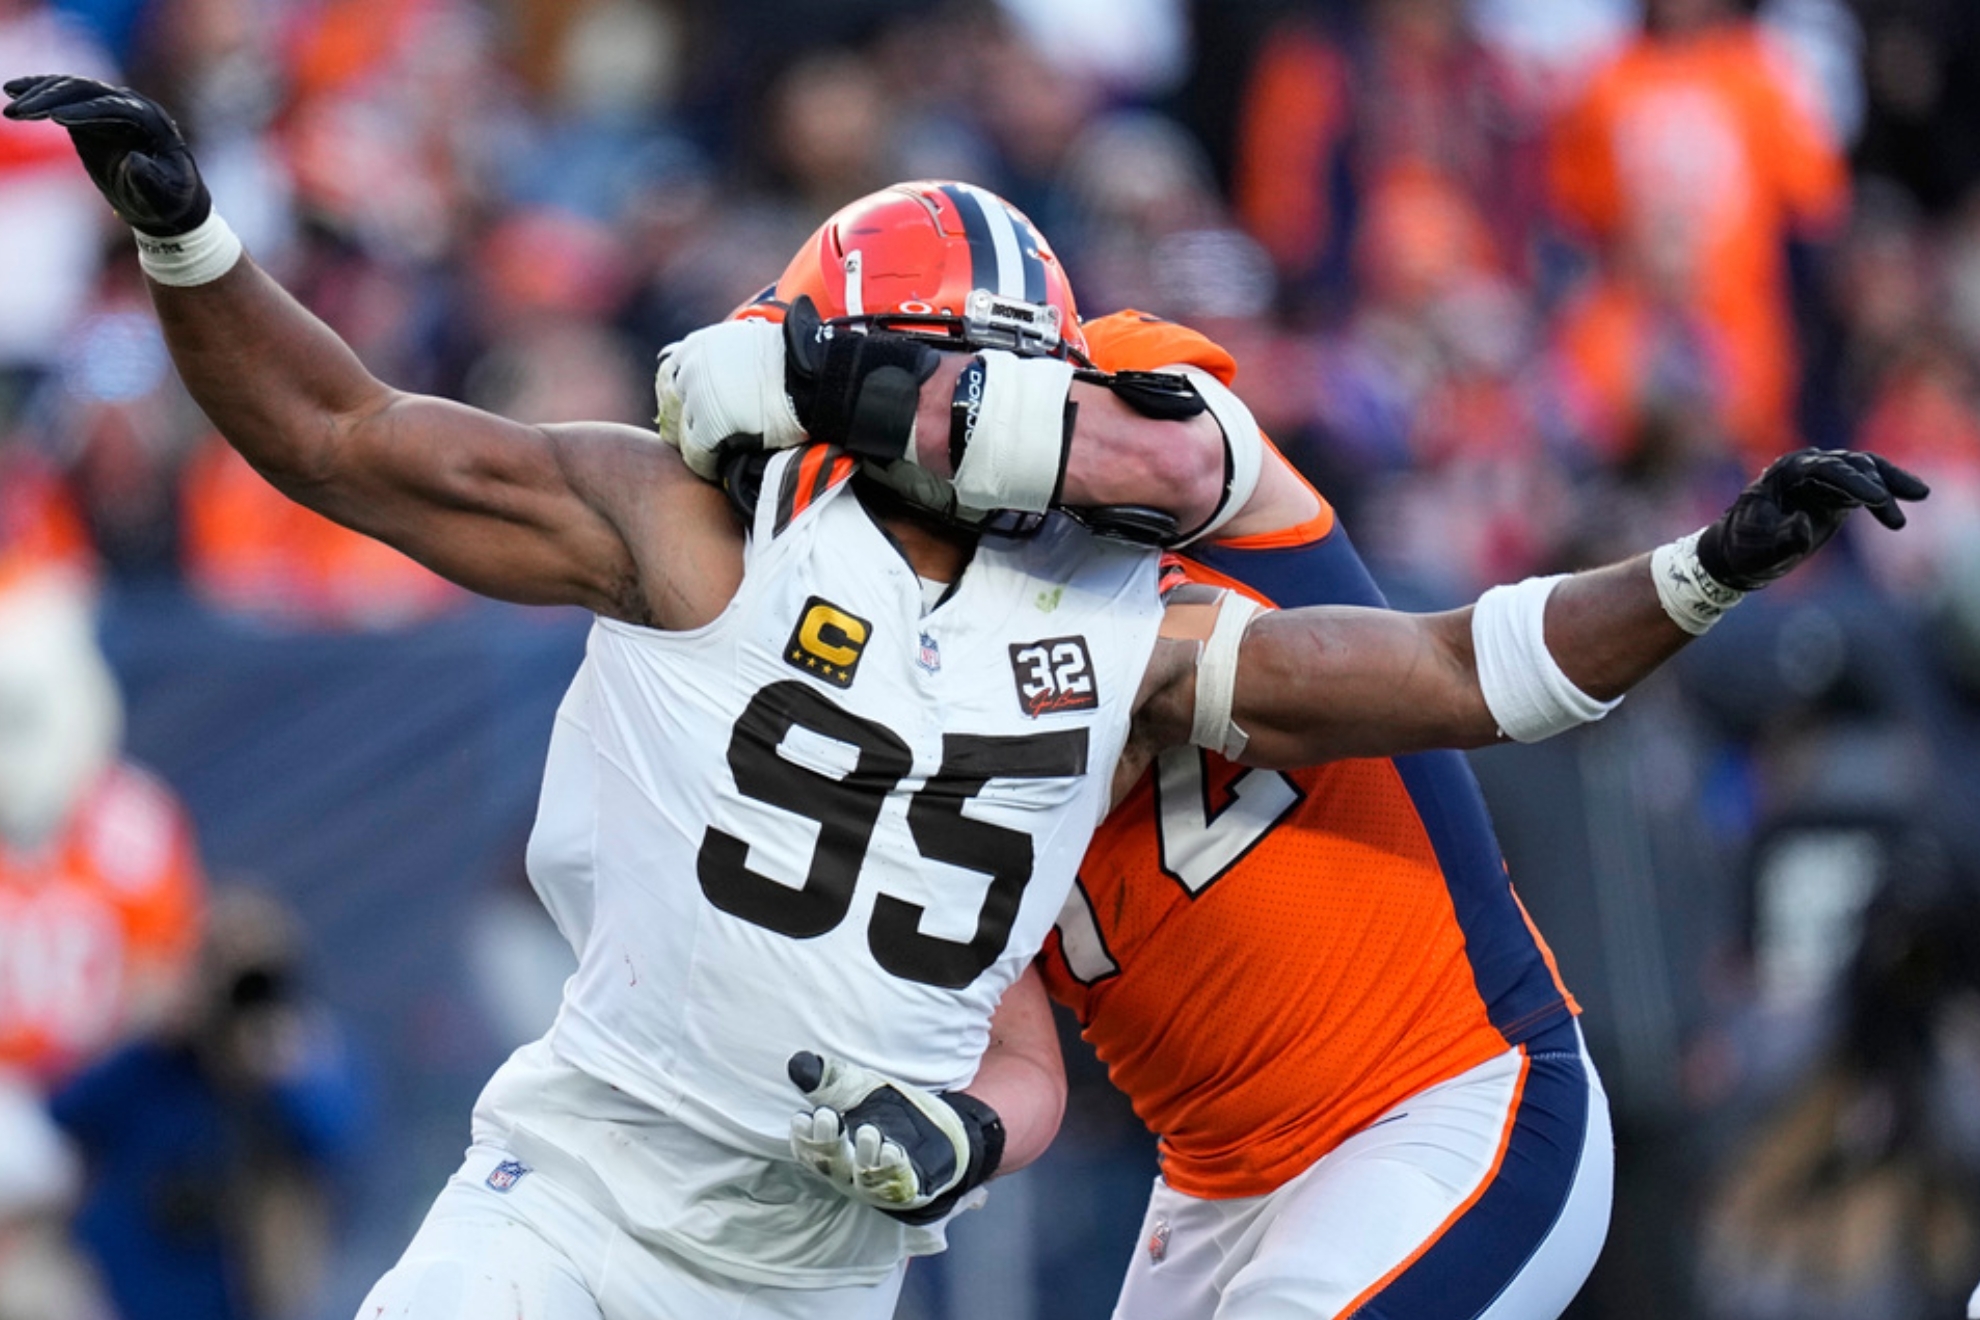 Myles Garrett escaped what could have been a serious injury